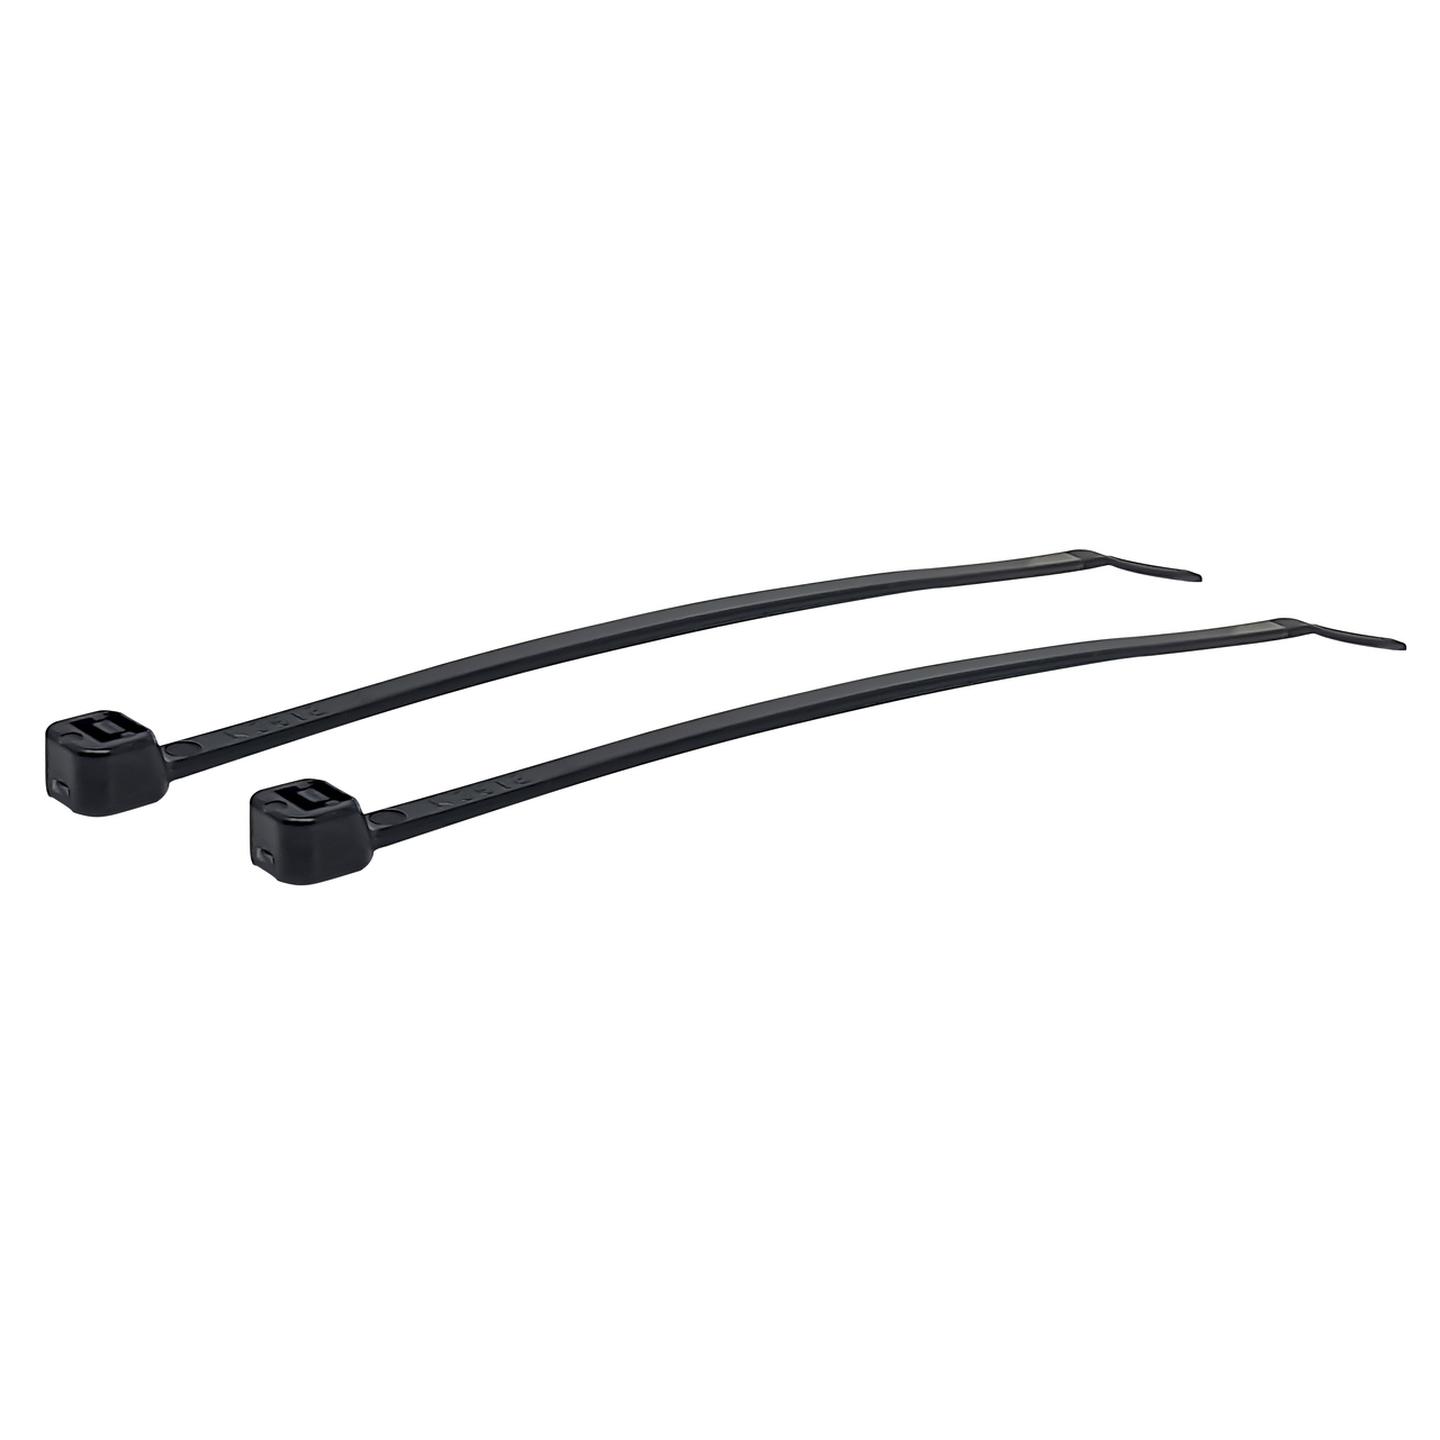 150mm Black Cable Ties - Pack of 500